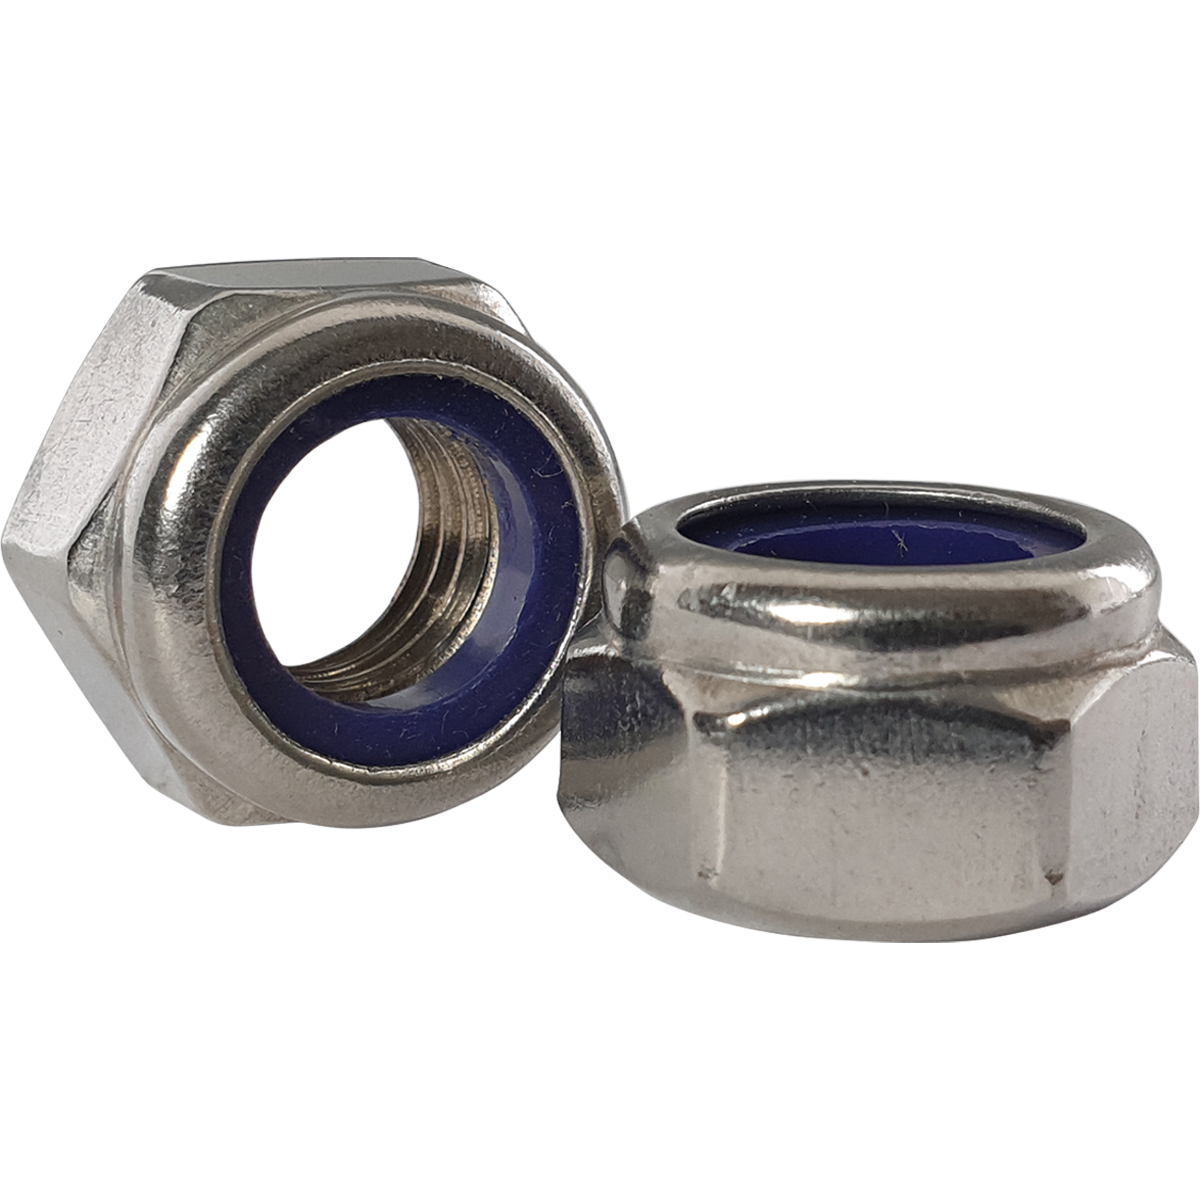 Corrosion resistant A4 stainless steel nylon insert nuts, also known as nyloc nuts, or nylon insert lock nuts. Various diameters and great prices and bulk discounts available.